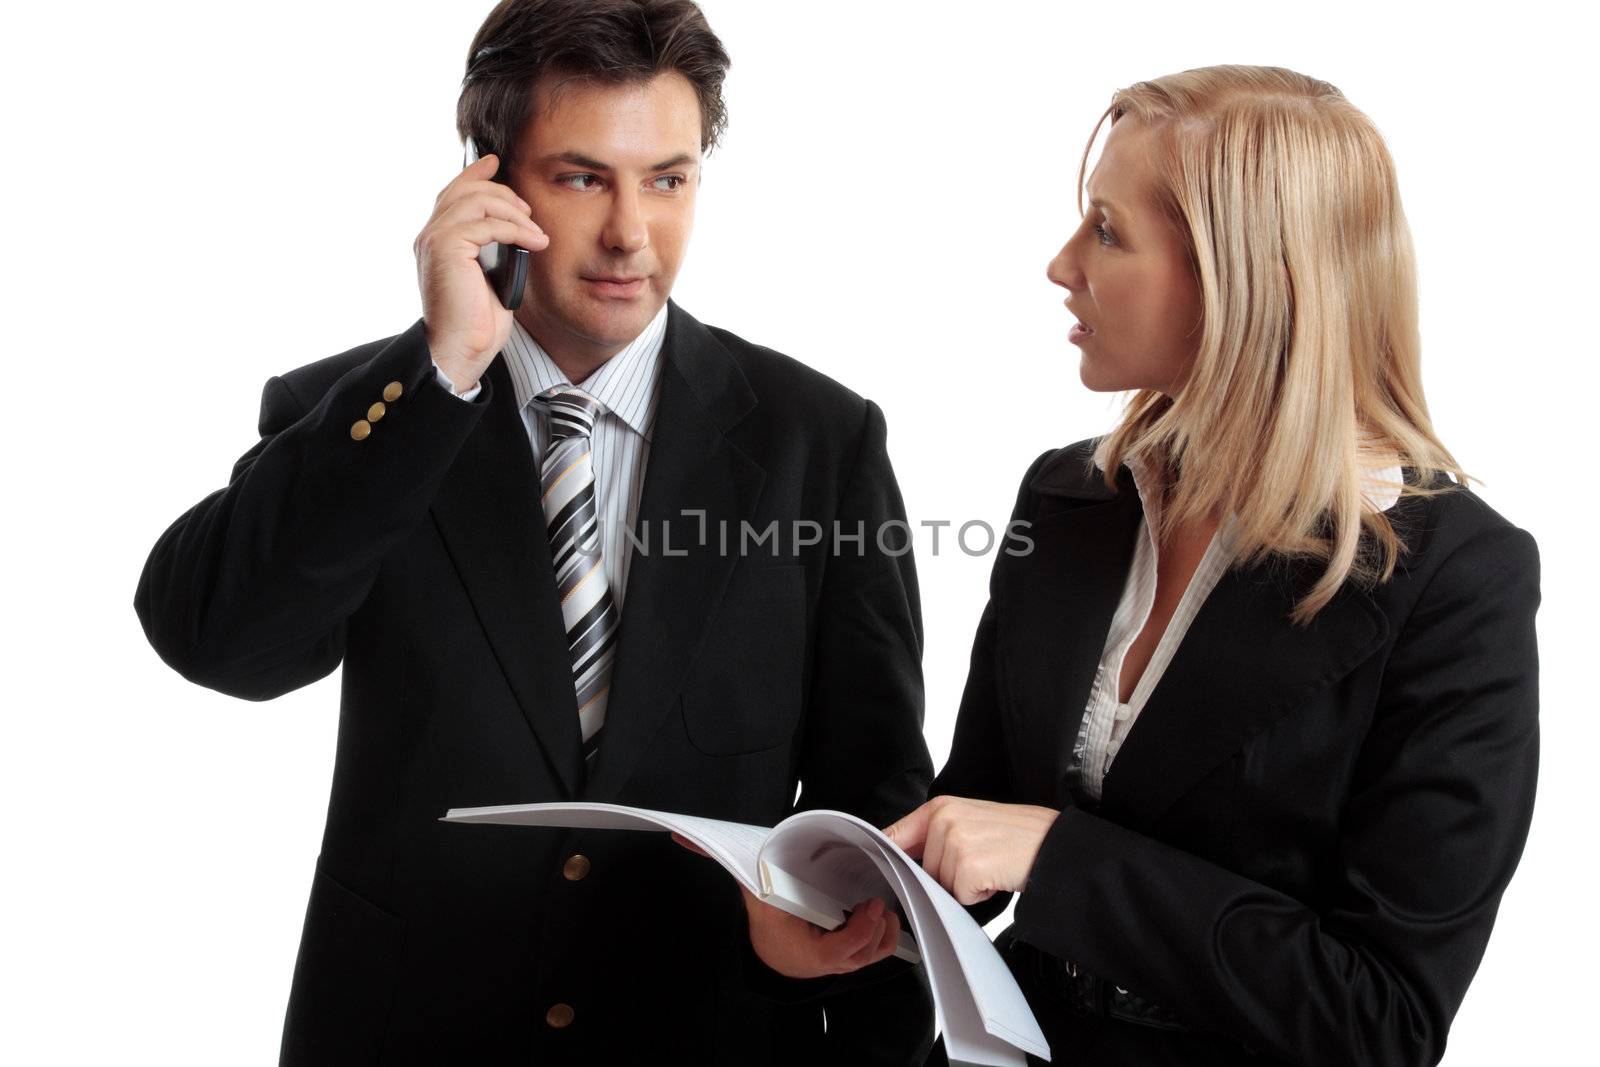 Business people discuss or make enquires or decision regarding a report, contract or other document.